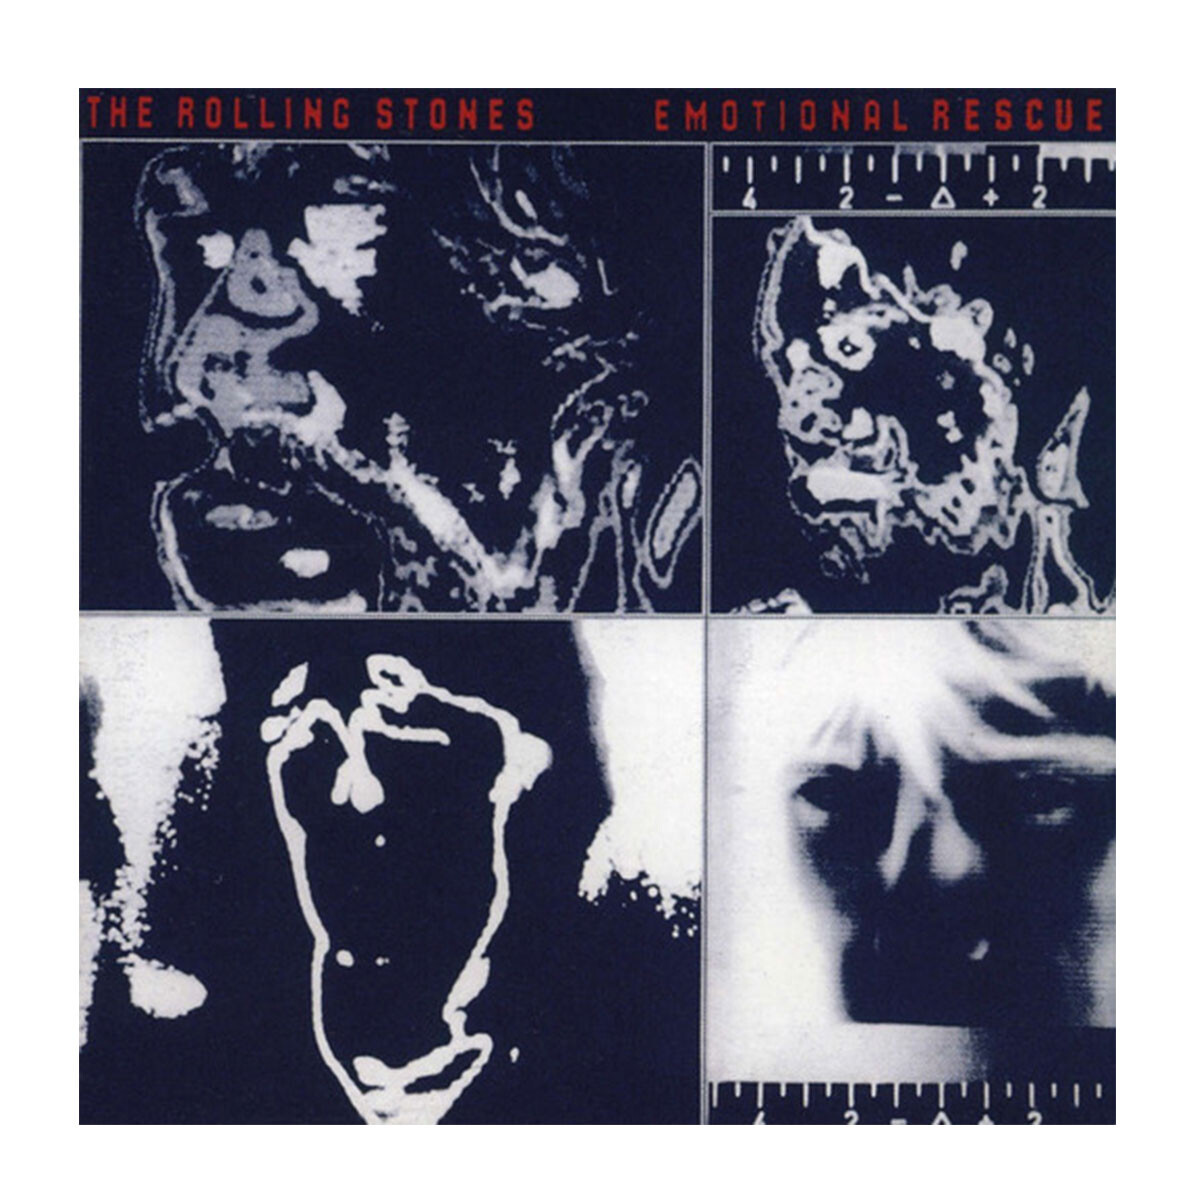 The Rolling Stones - Emotional Rescue (ed.2020) - Vinilo 